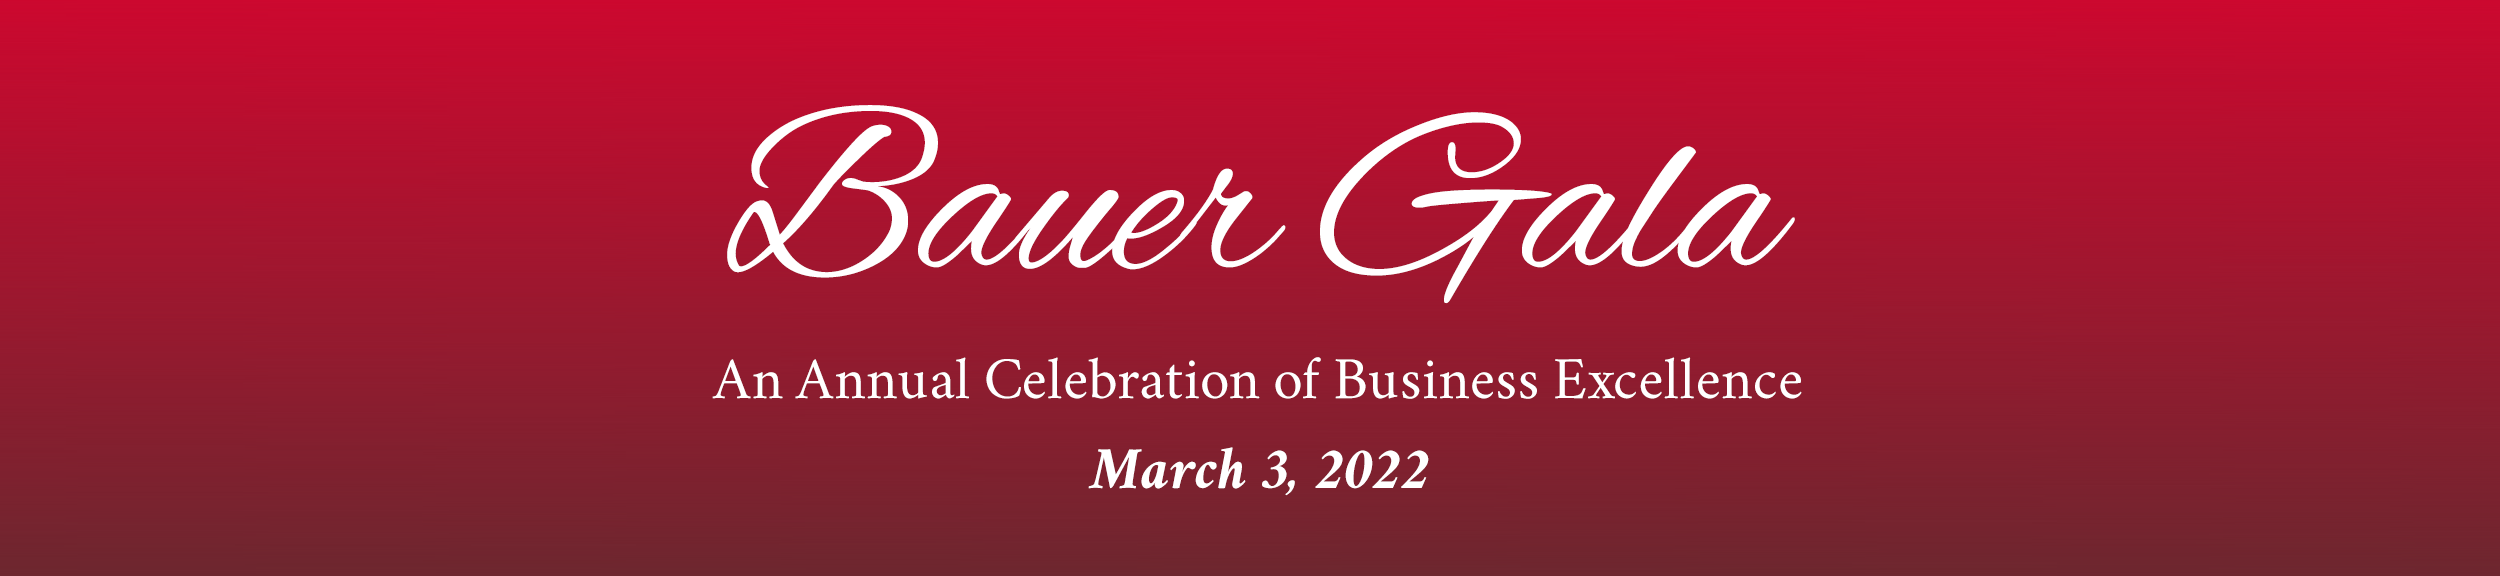 Bauer Gala and Awards: March 3, 2022